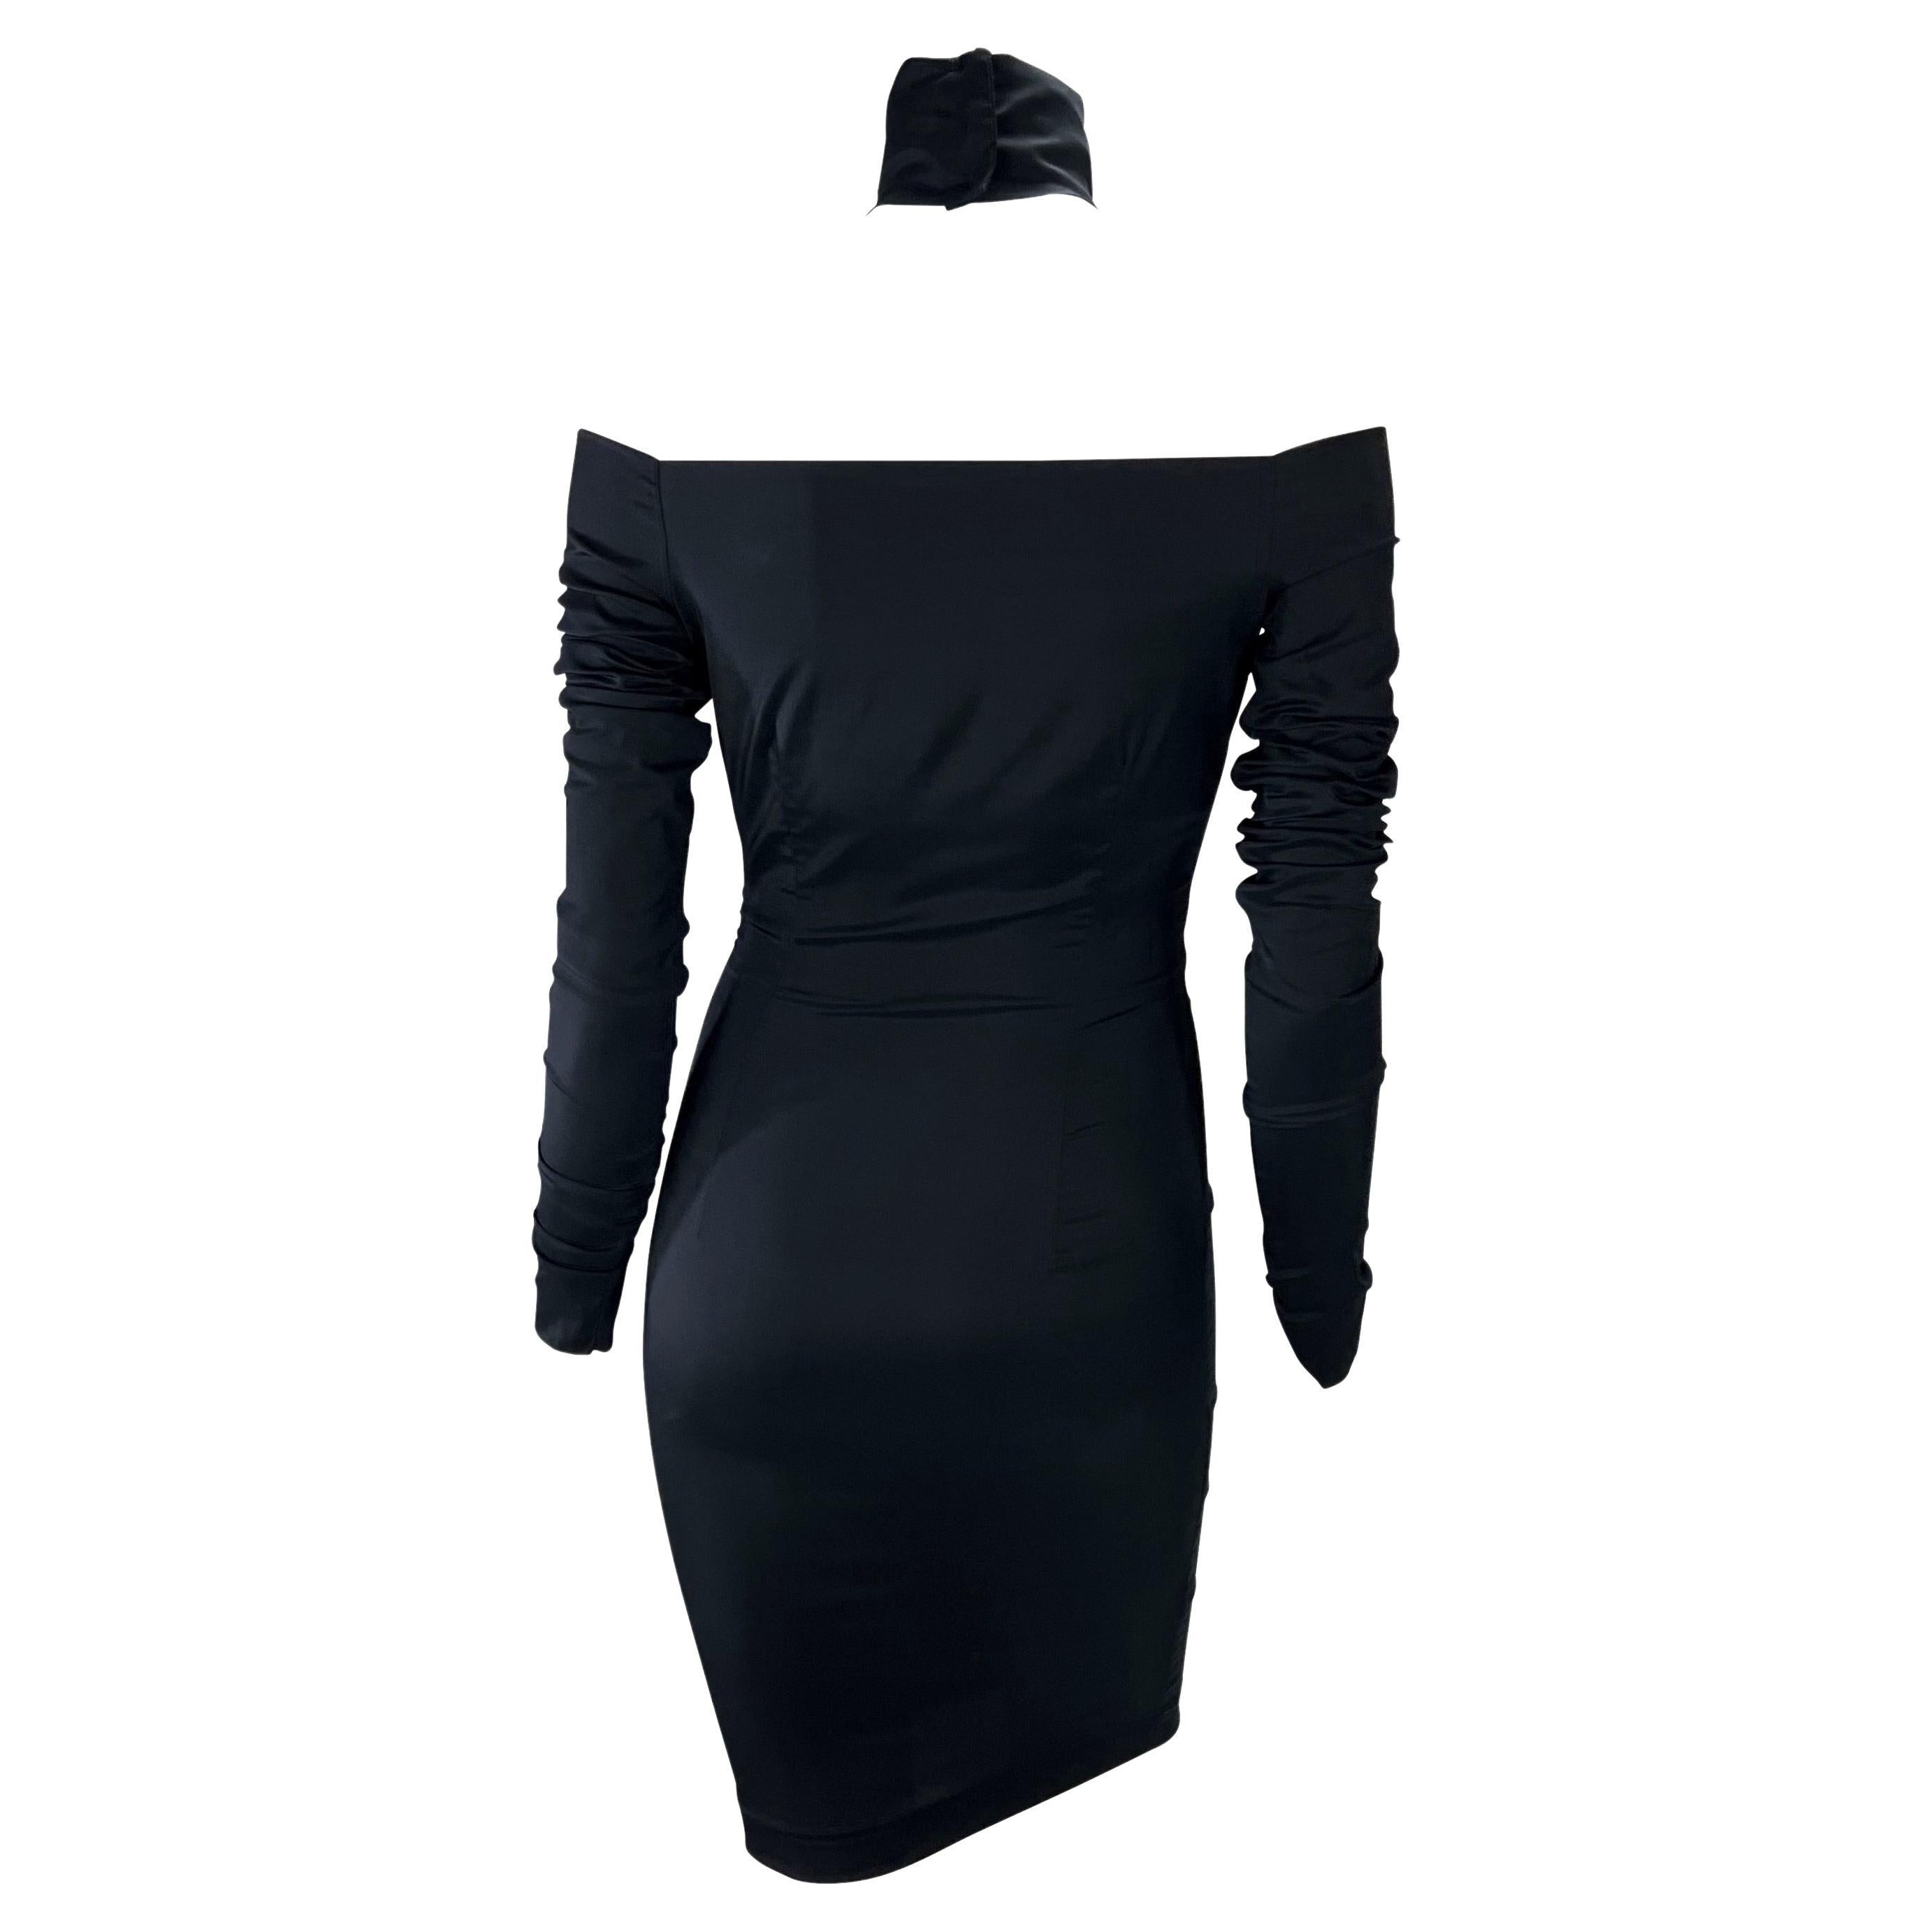 F/W 1991 Dolce & Gabbana Runway Black Mock Neck Crossover Bodycon Pin-Up Dress For Sale 1